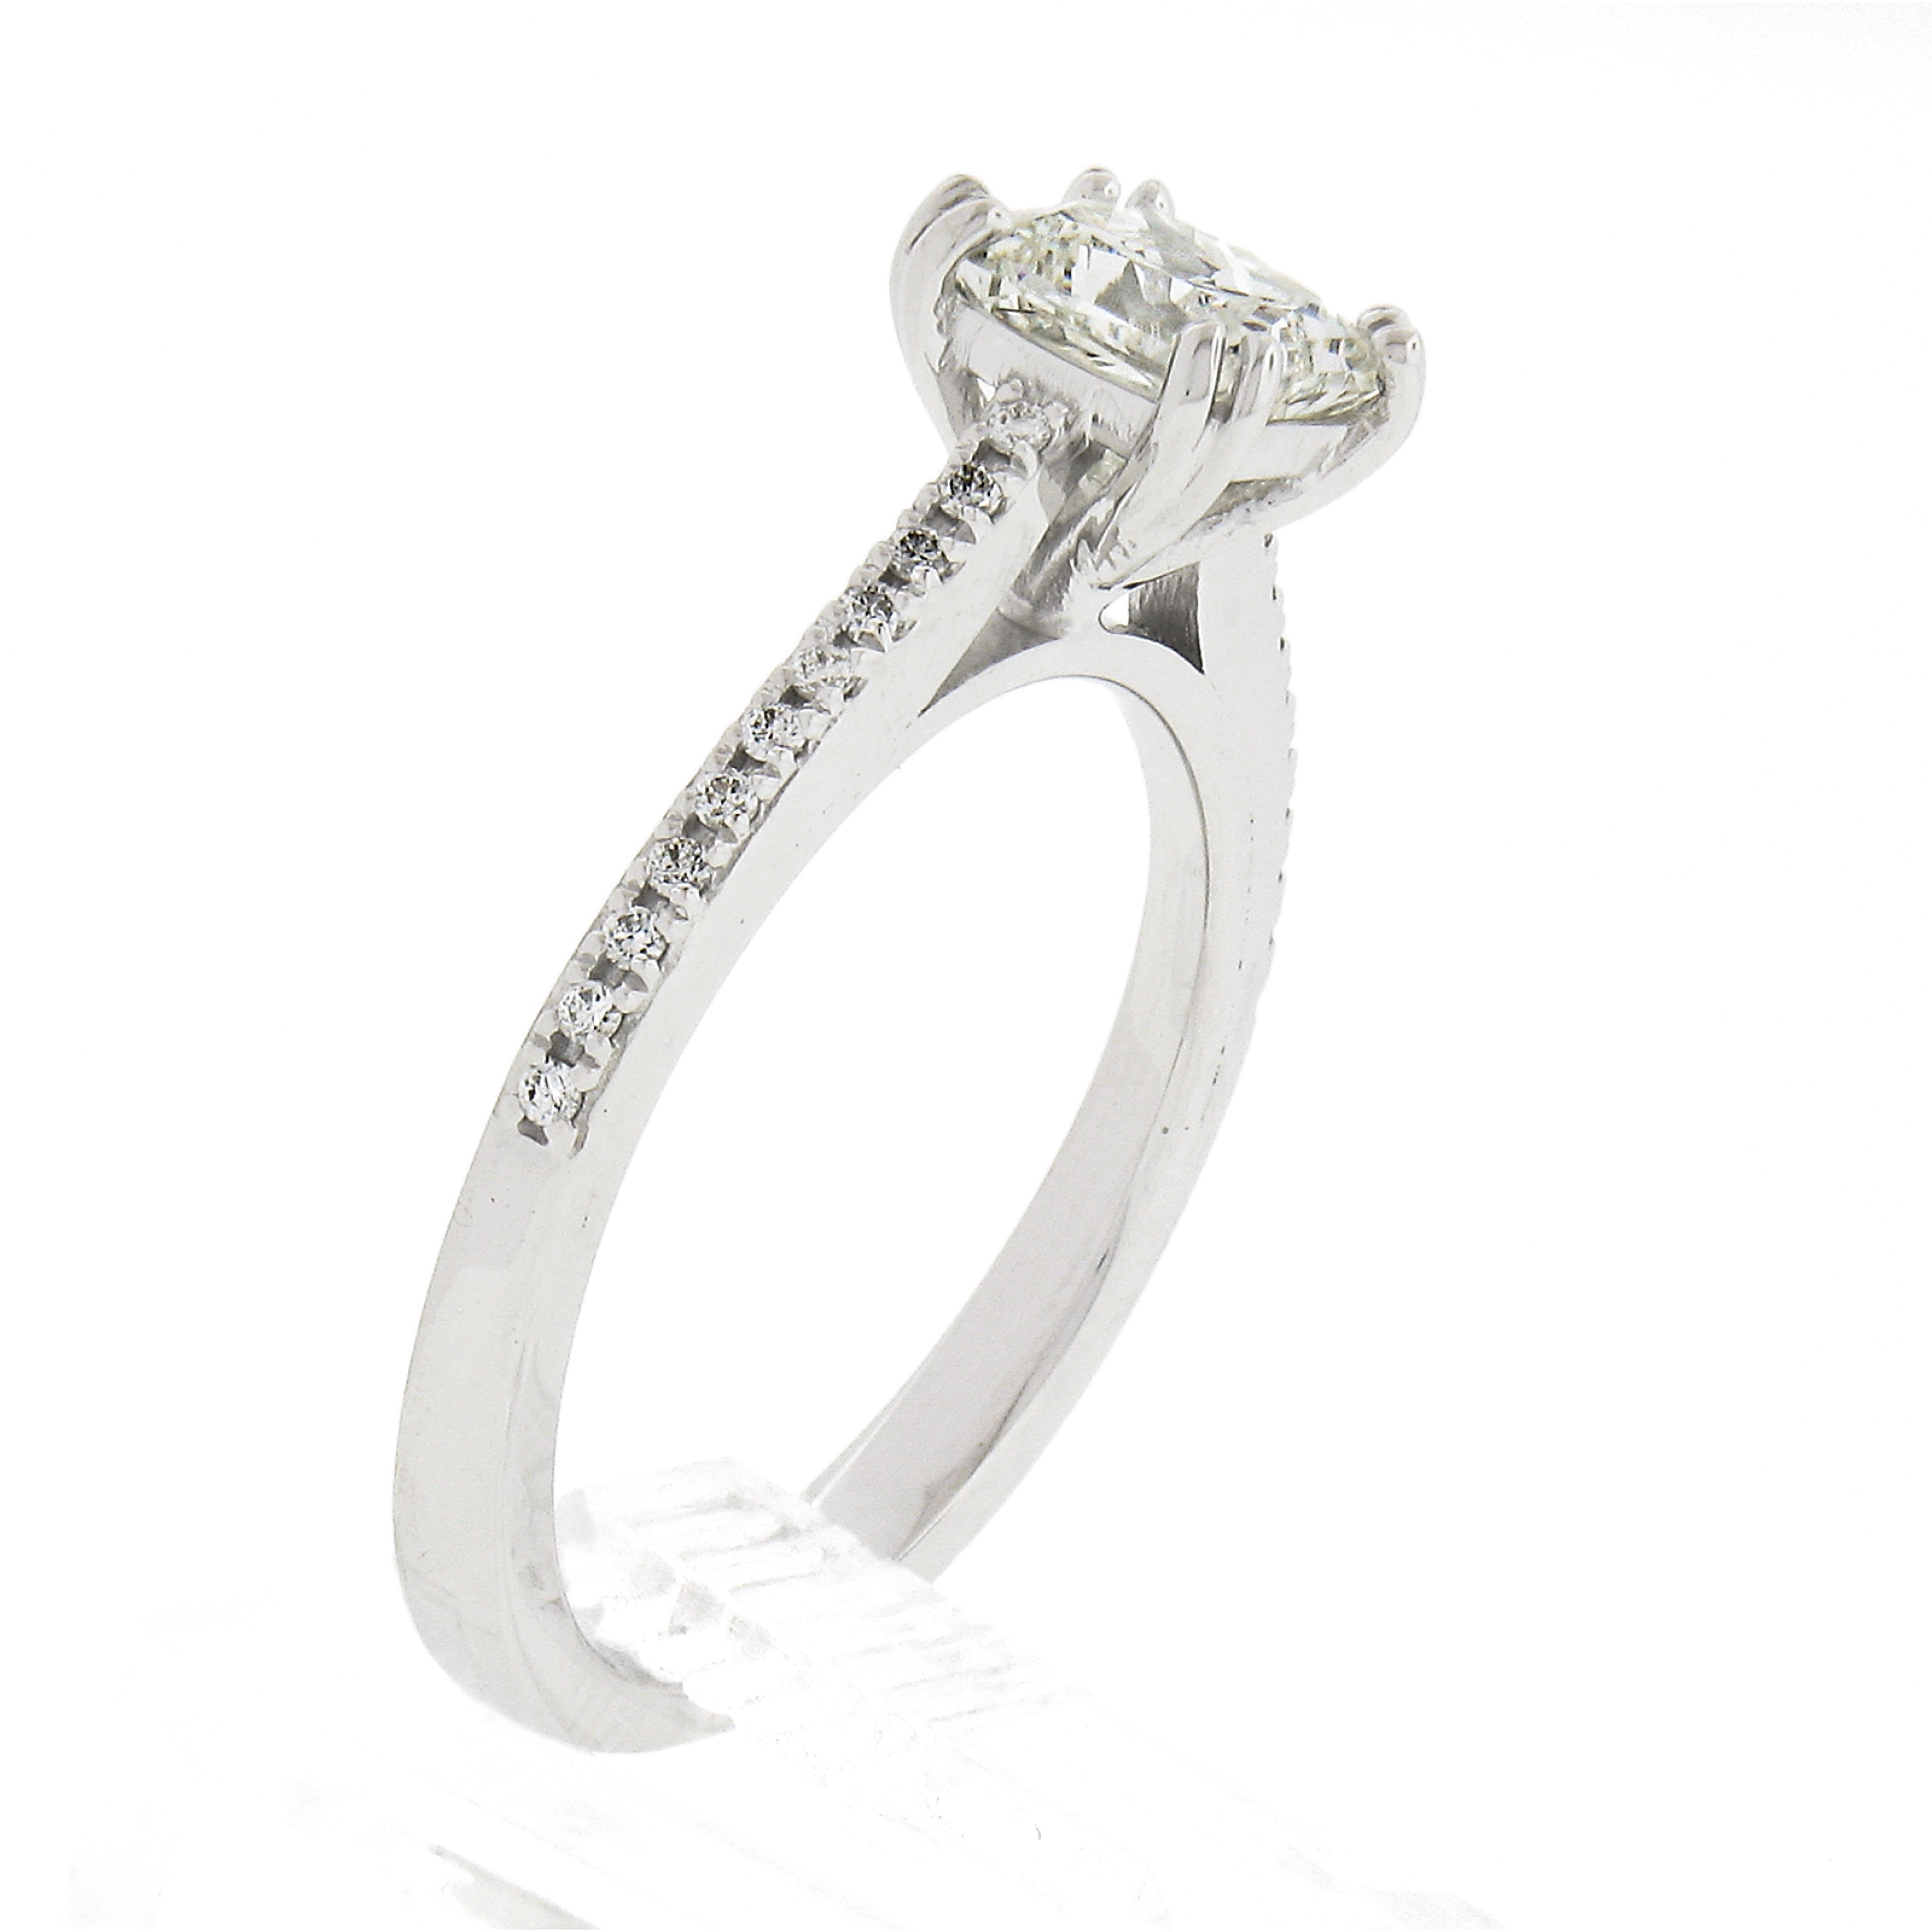 New 14k White Gold 1.12ctw GIA Princess Cut Diamond Solitaire Engagement Ring For Sale 5